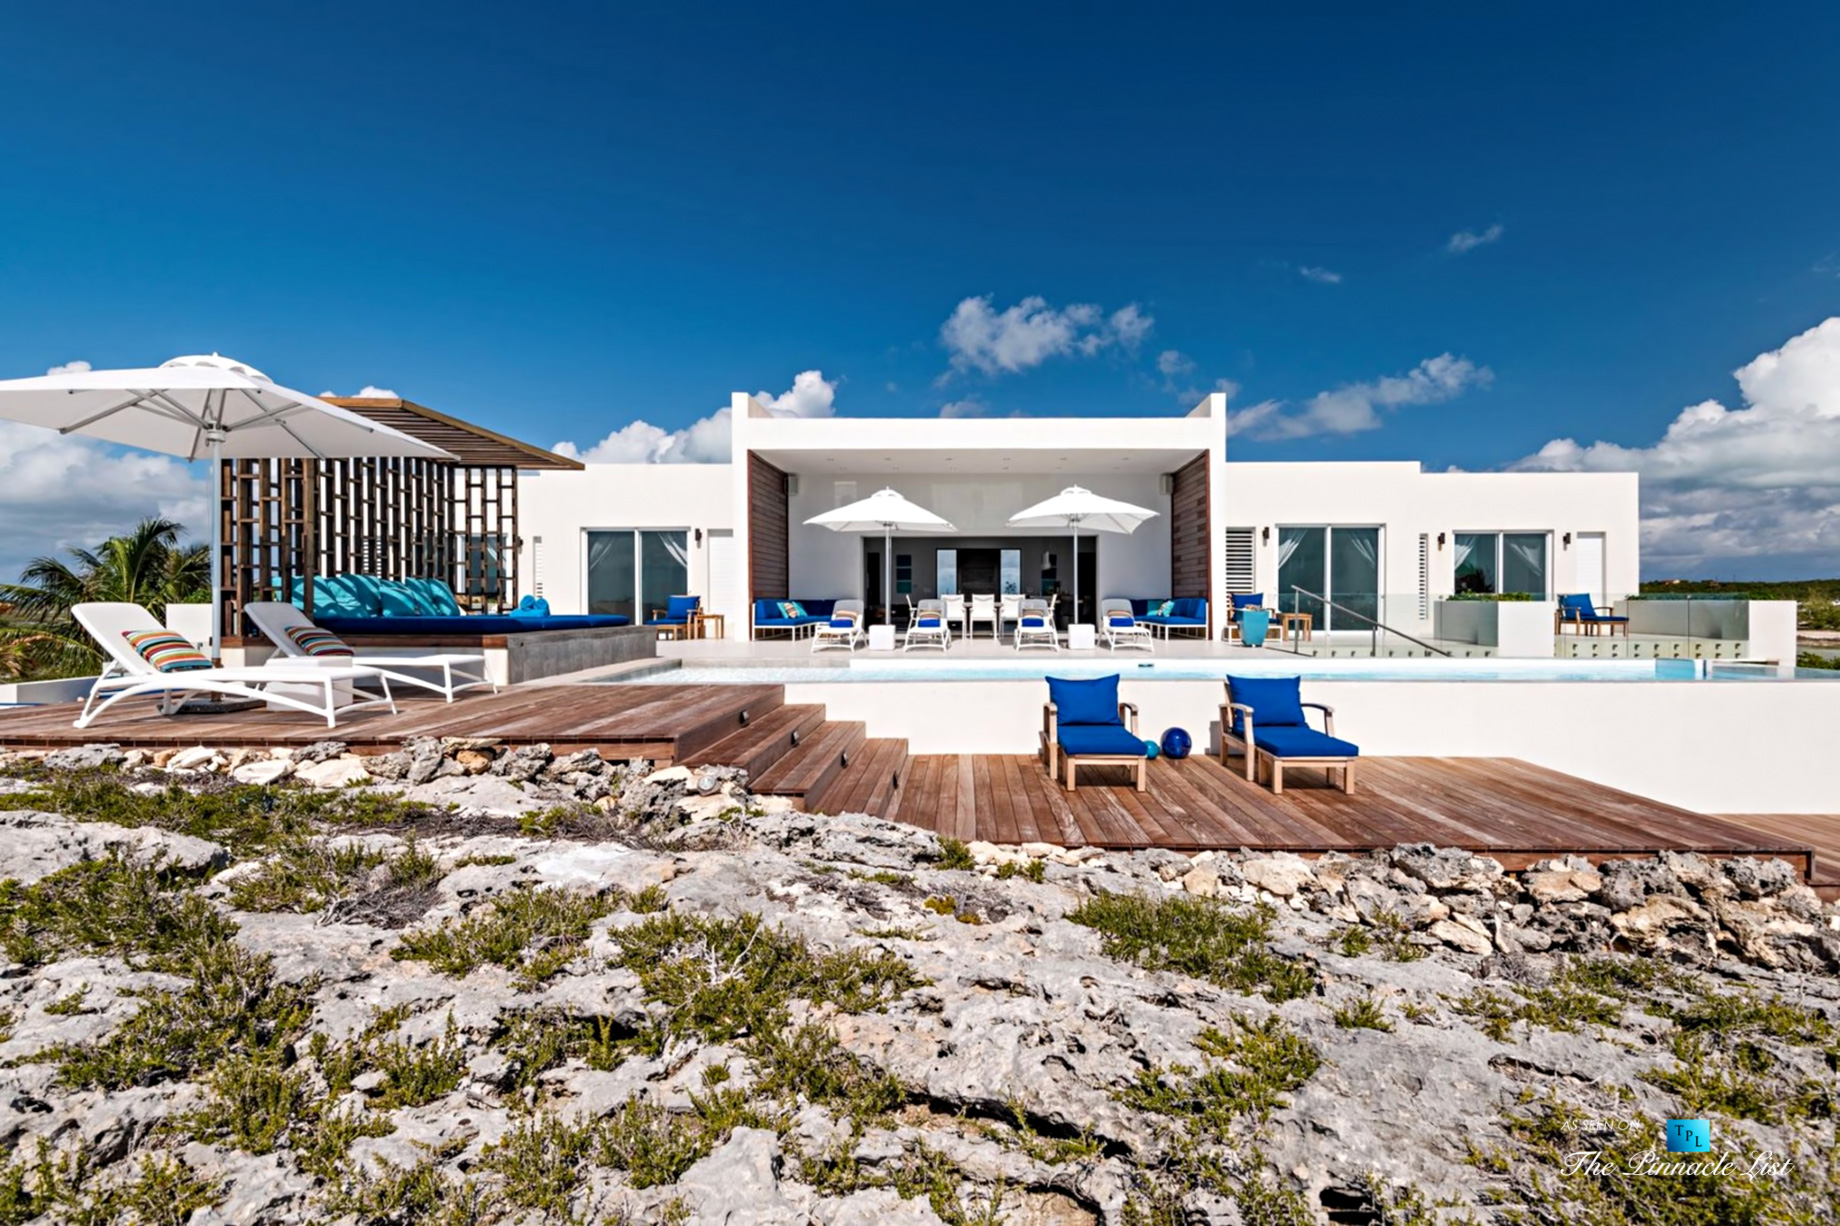 Tip of the Tail Villa - Providenciales, Turks and Caicos Islands - Caribbean Oceanfront House - Luxury Real Estate - South Shore Peninsula Home